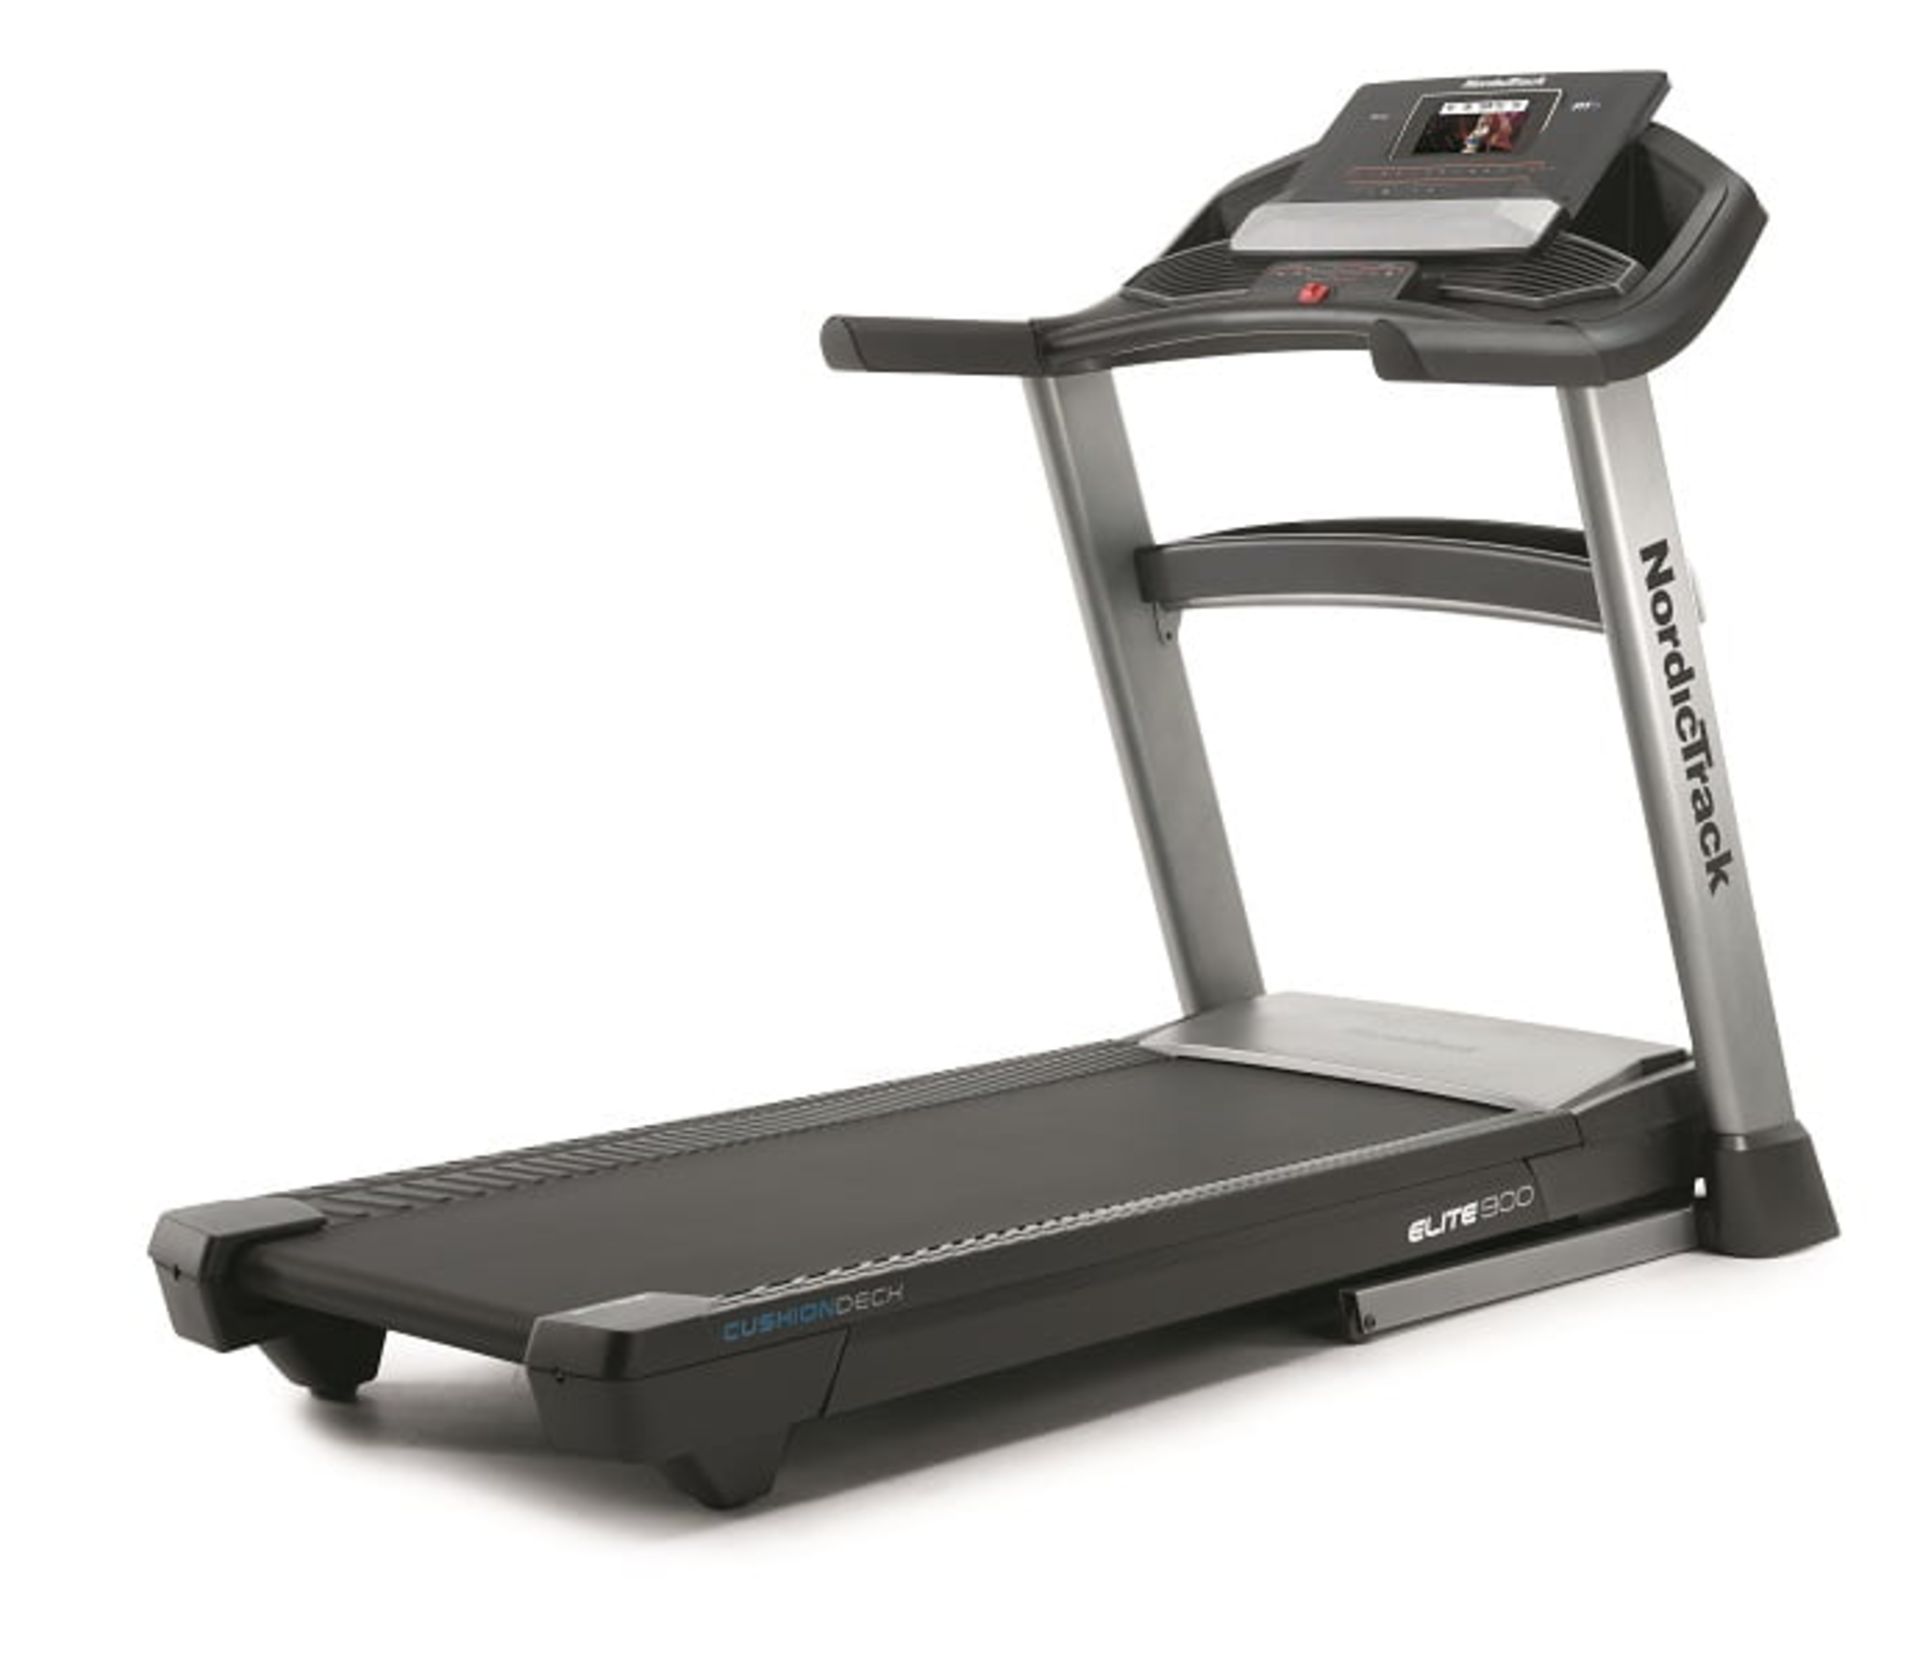 1 NORDIC TRACK ELITE 900 TREADMILL RRP Â£999 (POWERS ON, INCLINE WORKS, TRACK NOT MOVING)